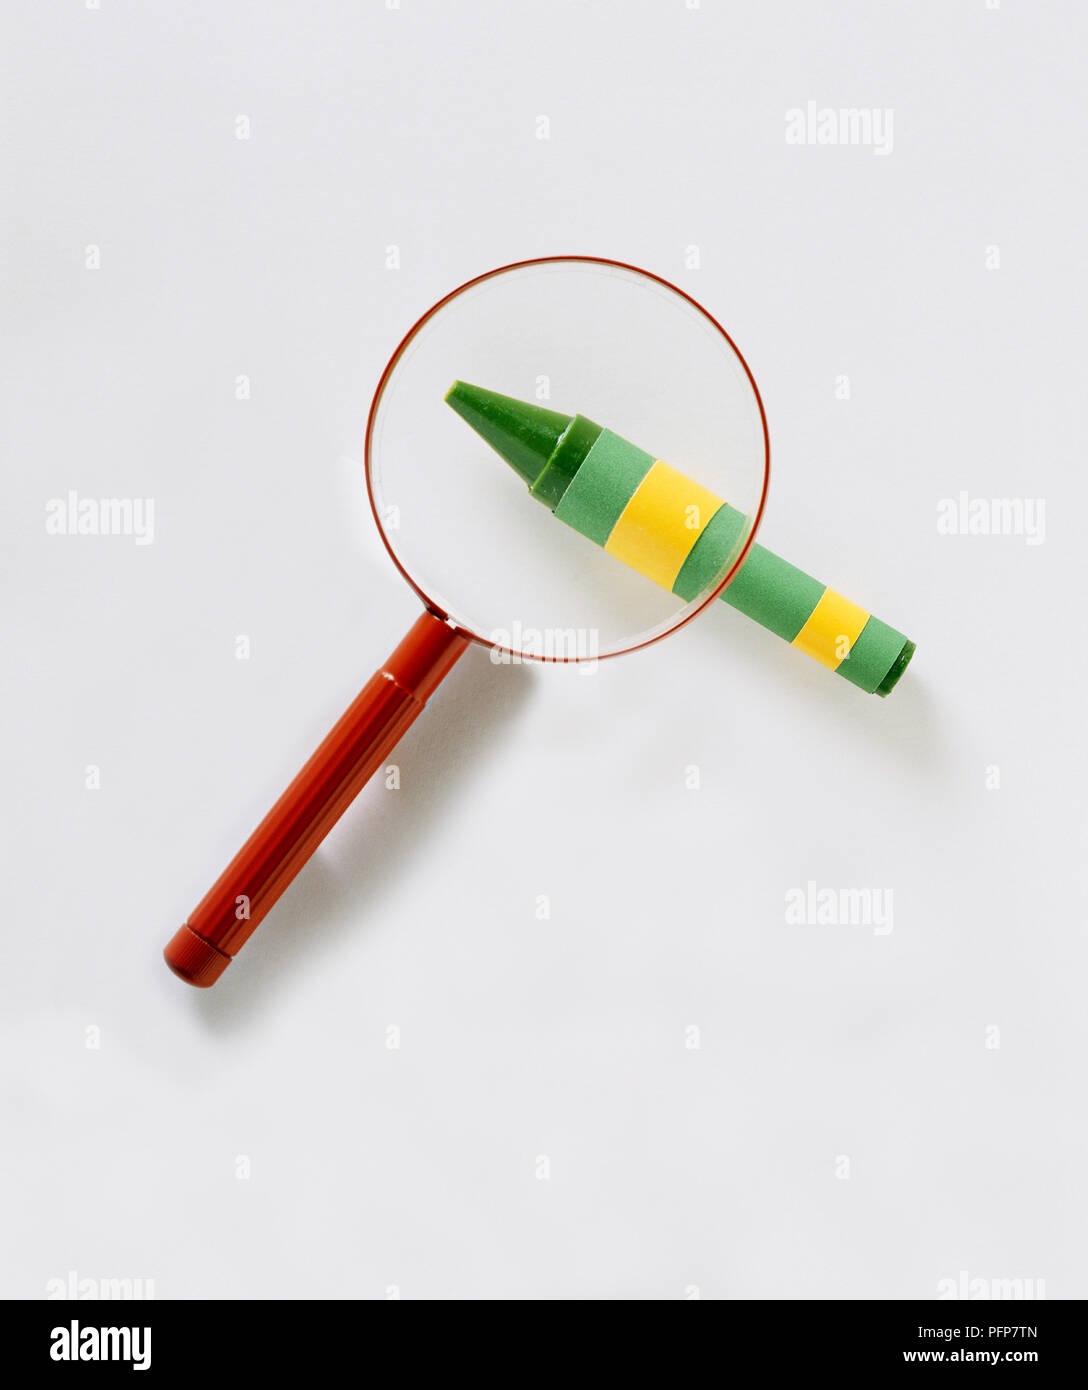 View through magnifying glass above green wax crayon Stock Photo